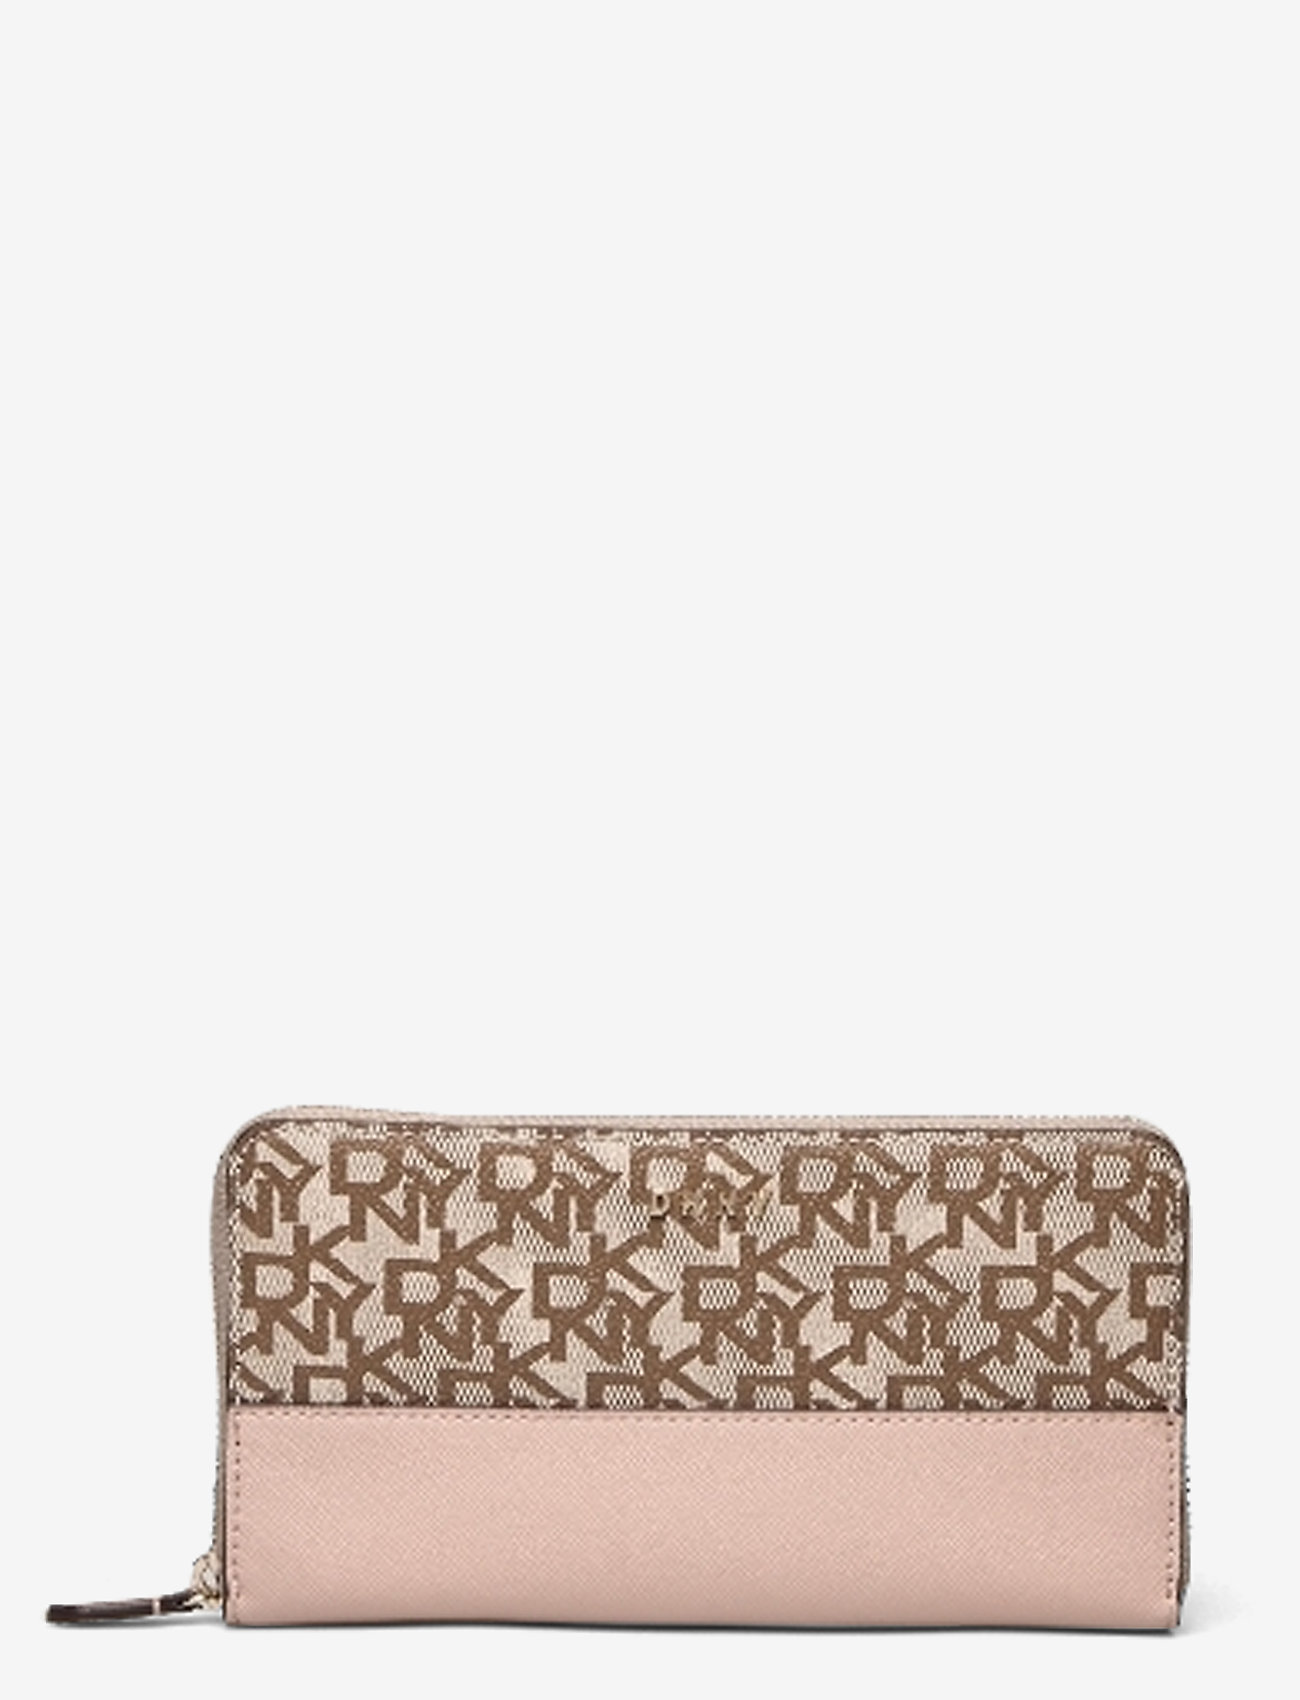 DKNY Bags Wallet - Punge Boozt.com